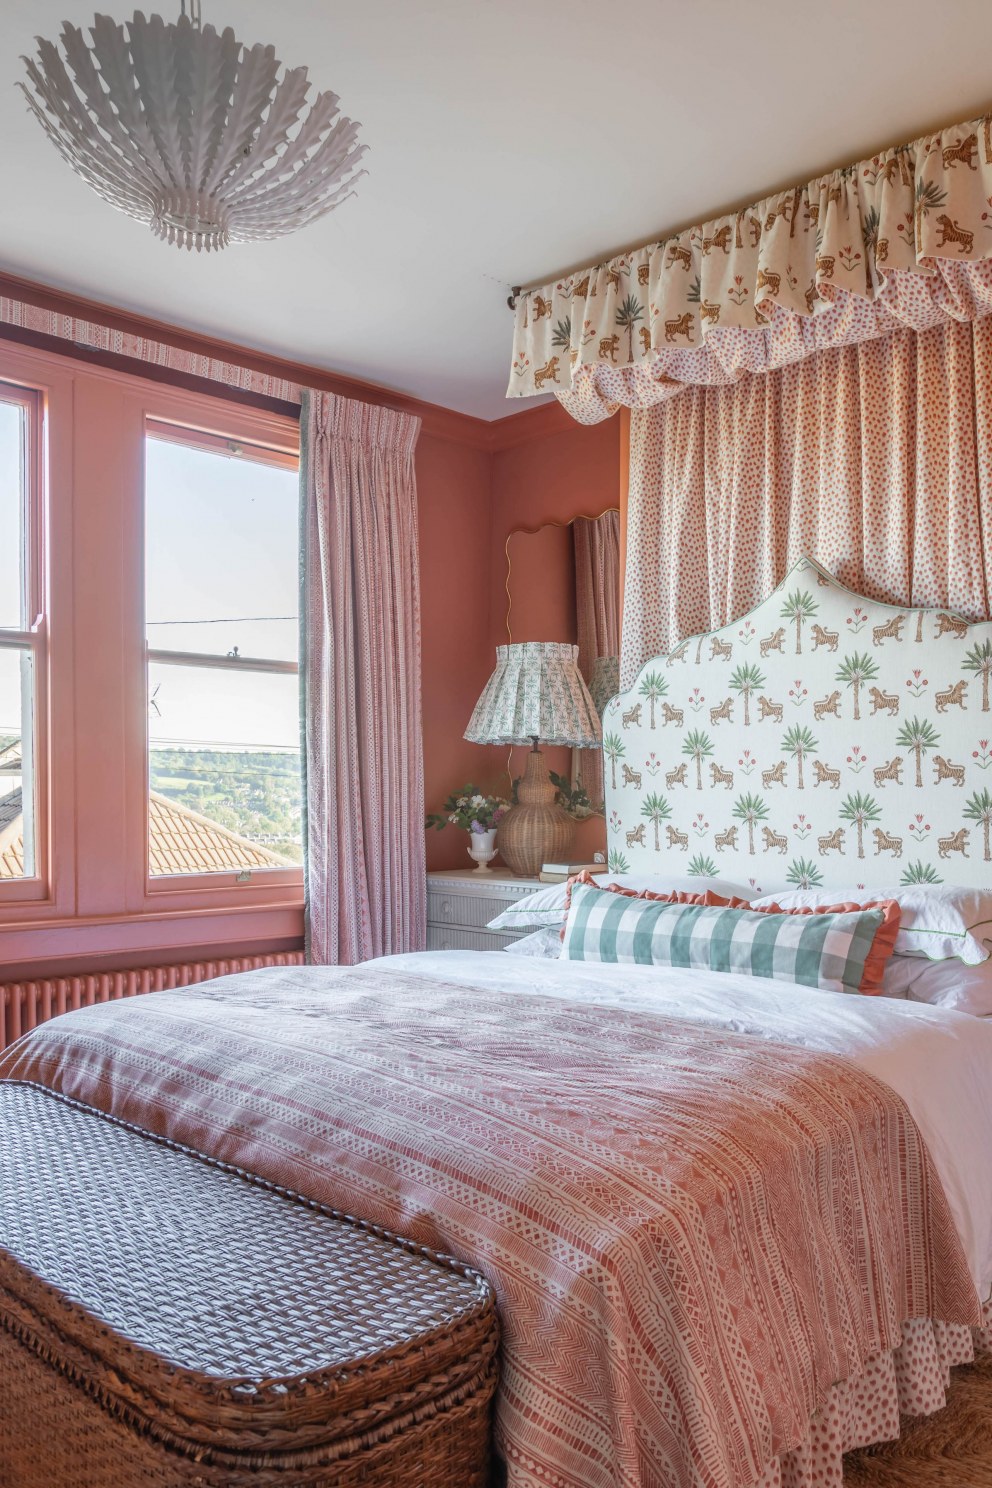 West Country townhouse | Bedroom | Interior Designers